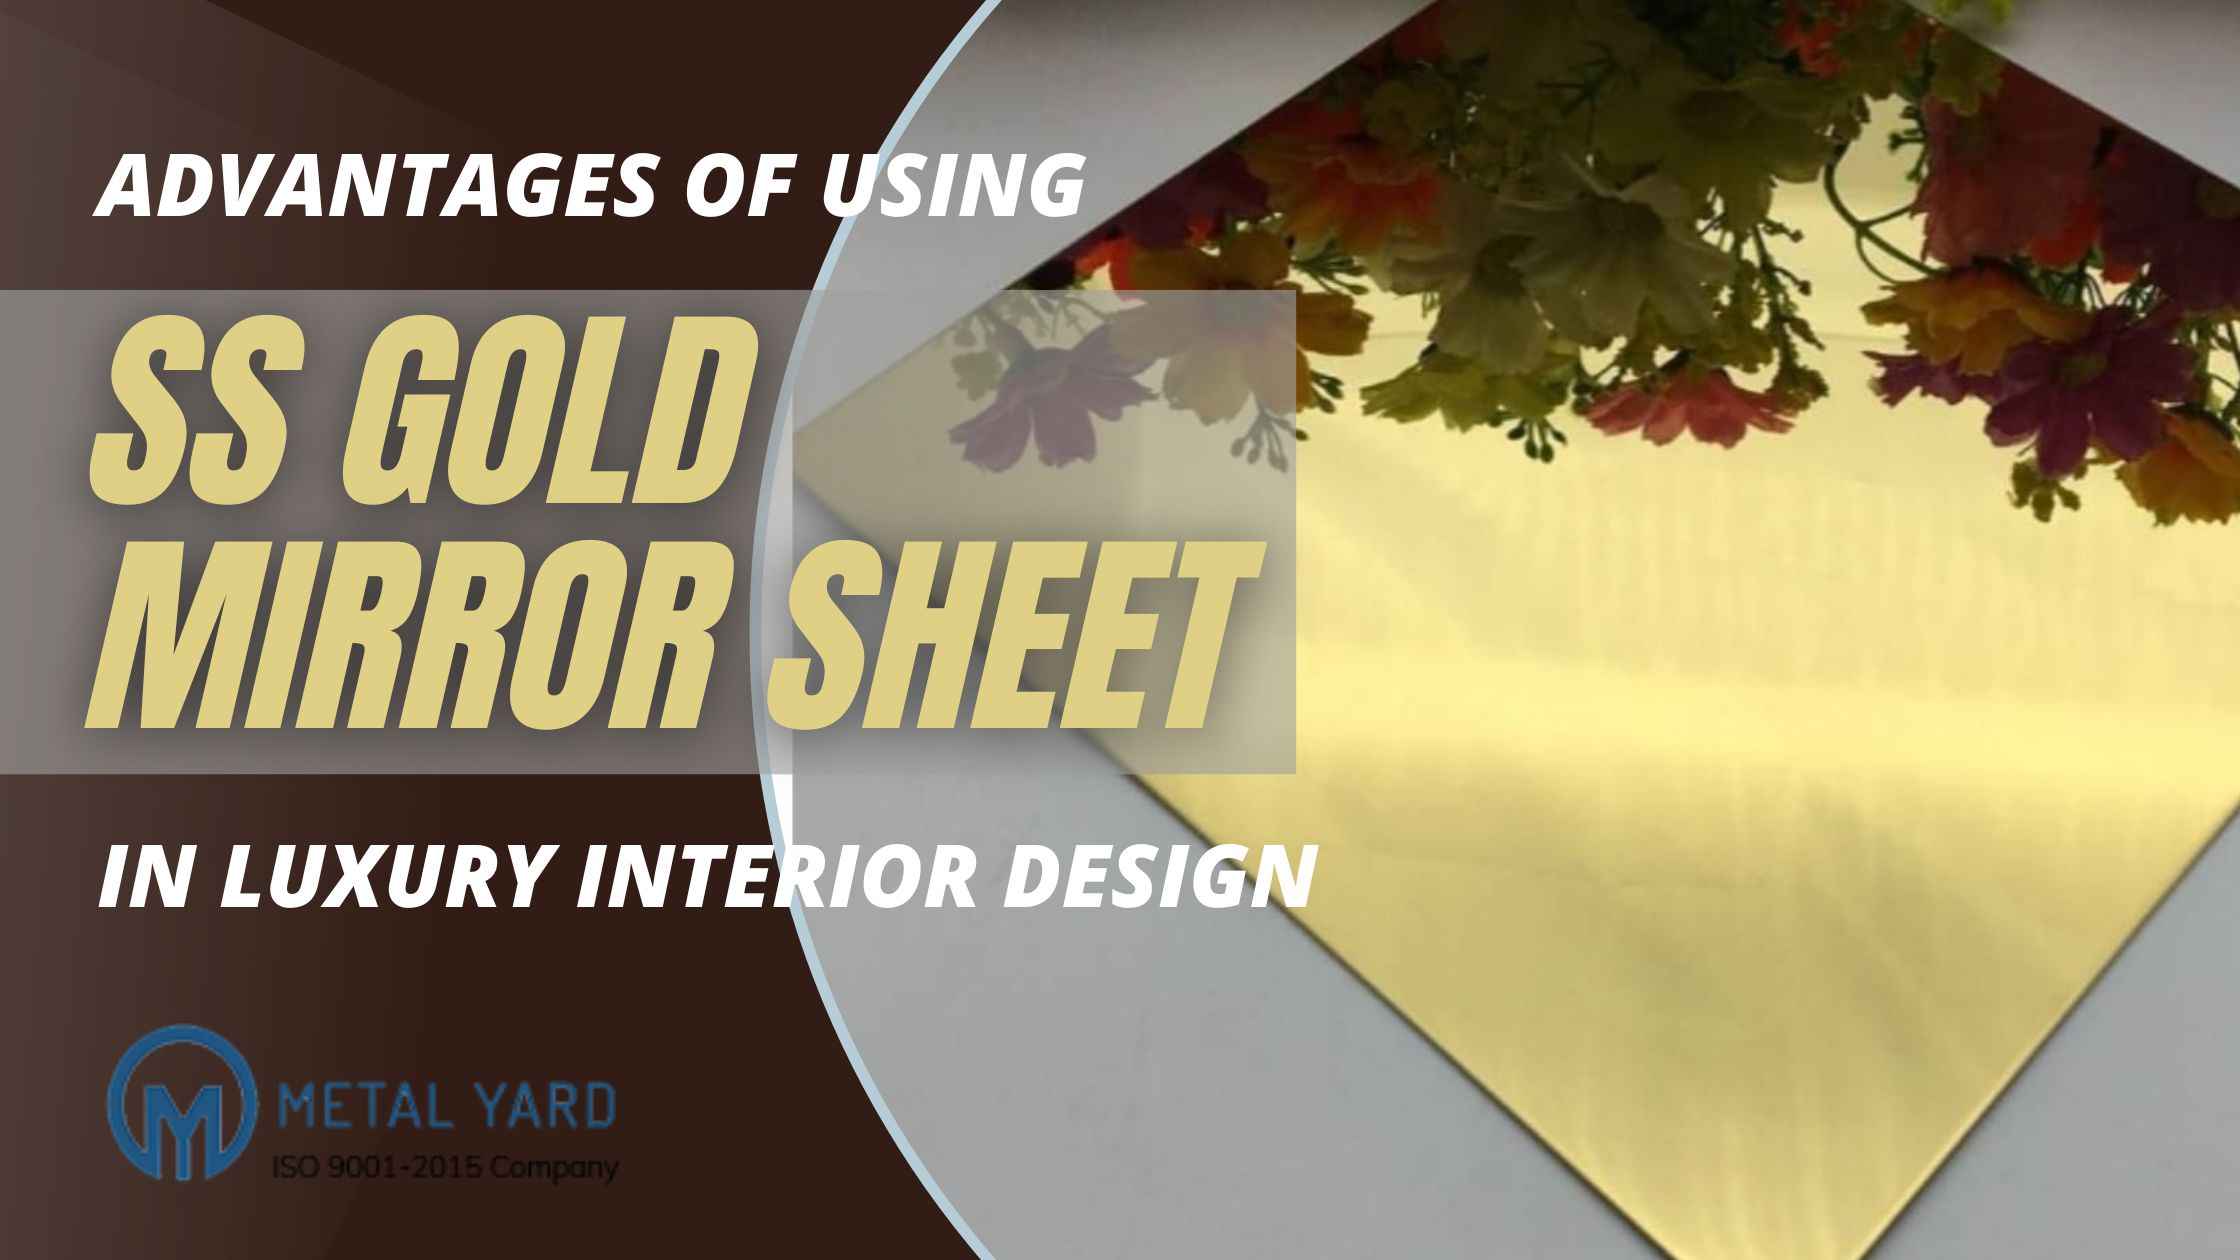 Advantages of Using SS Gold Mirror Sheet in Luxury Interior Design